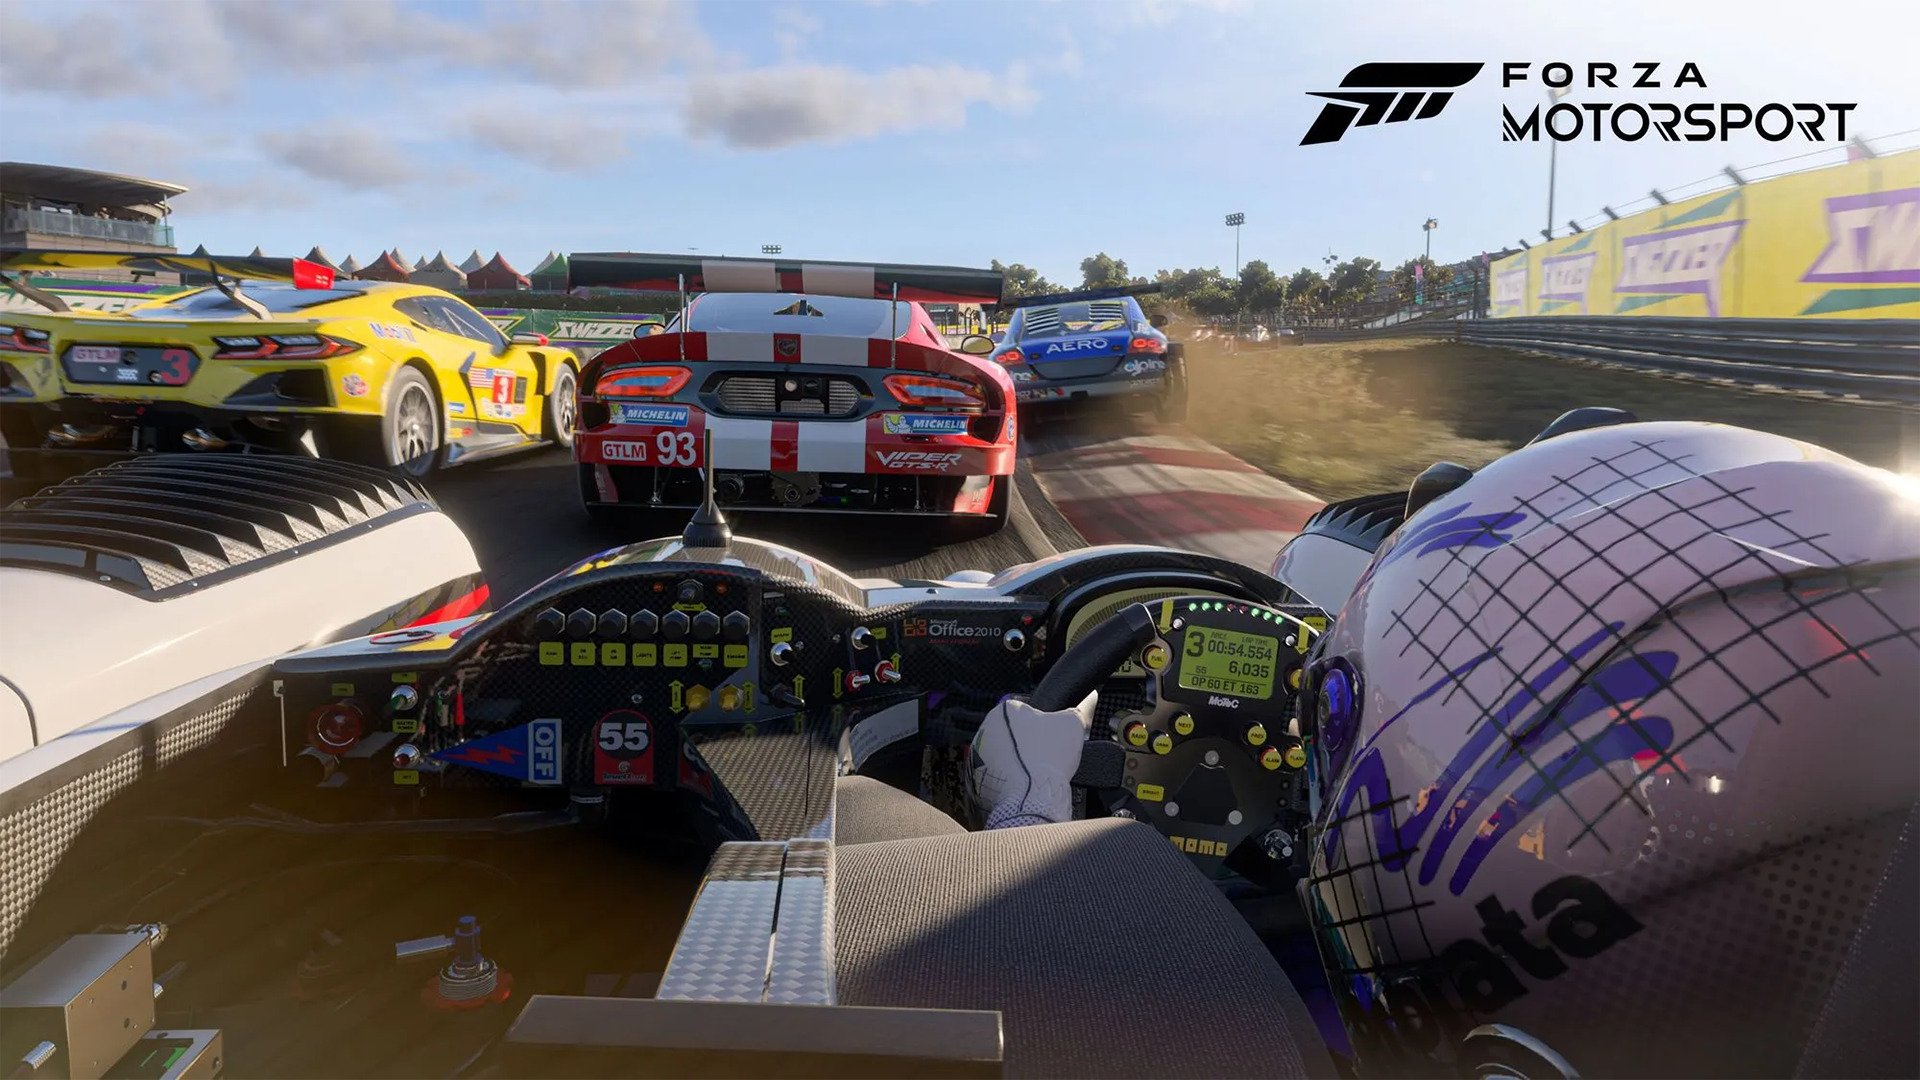 Forza Monthly livestream Nov. 6 - Forza Motorsport (2023) Discussion -  Official Forza Community Forums